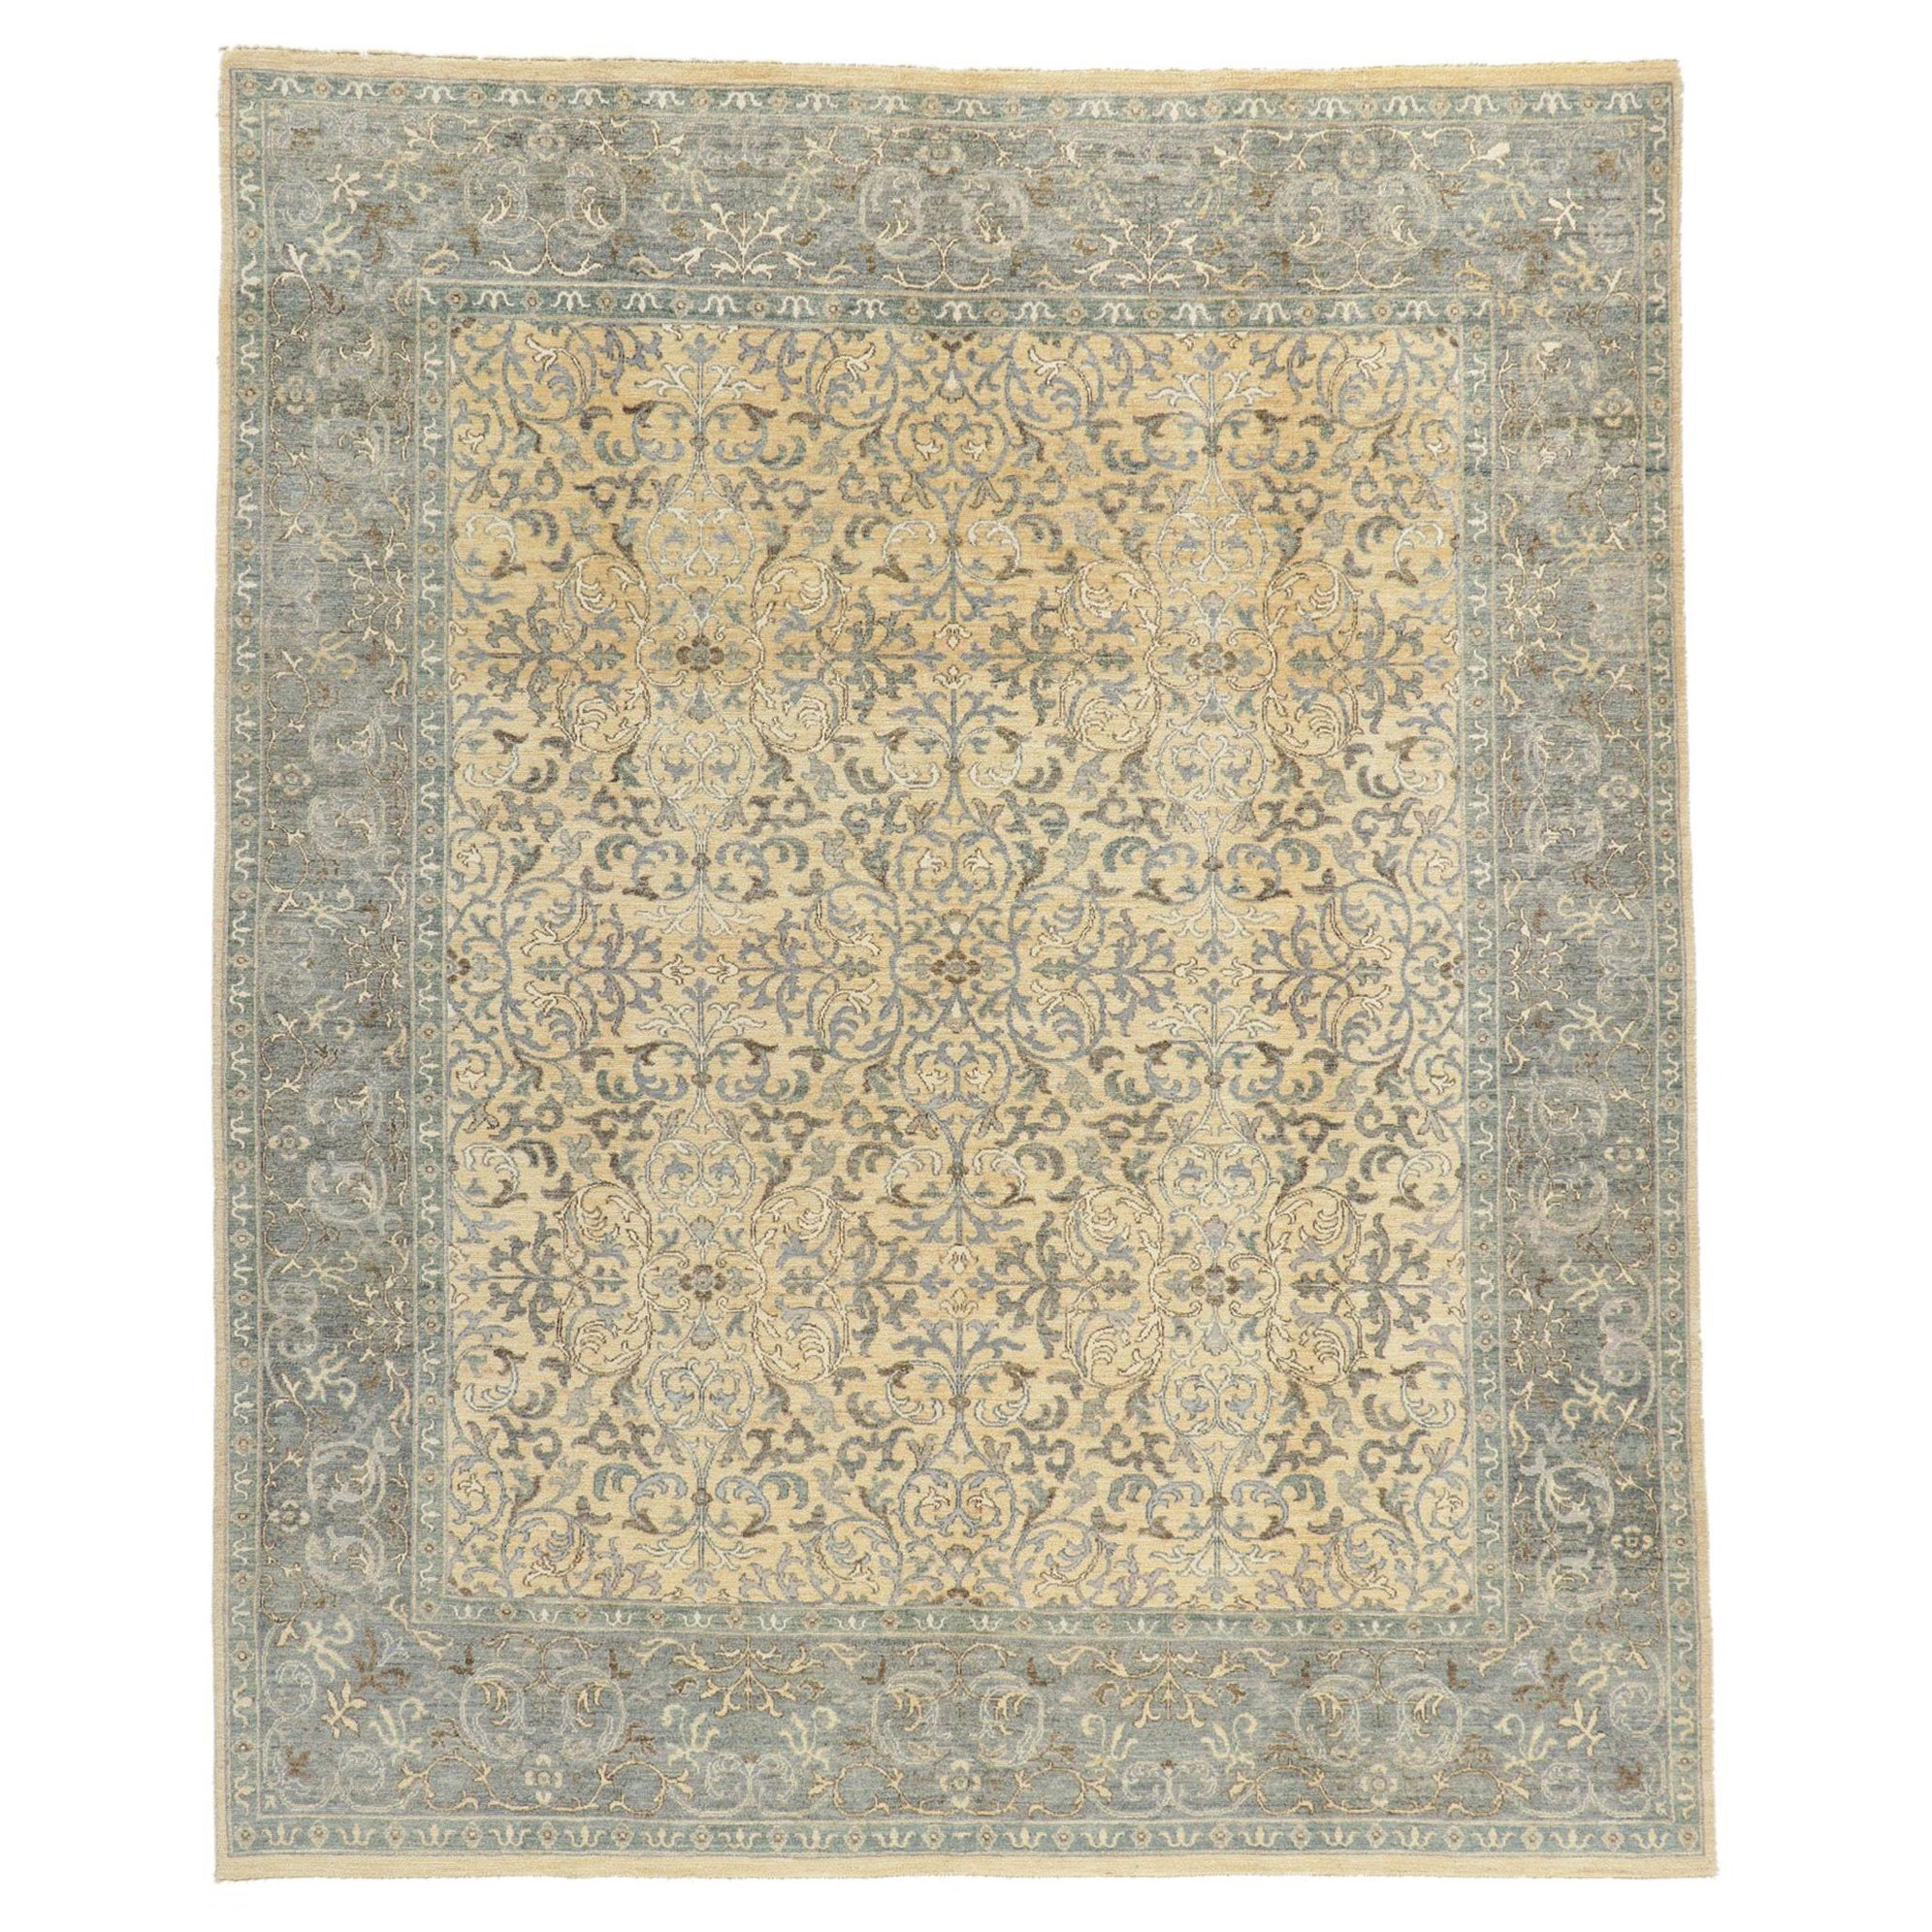 New Transitional Damask Scroll Rug with Soft Earth-Tone Colors For Sale